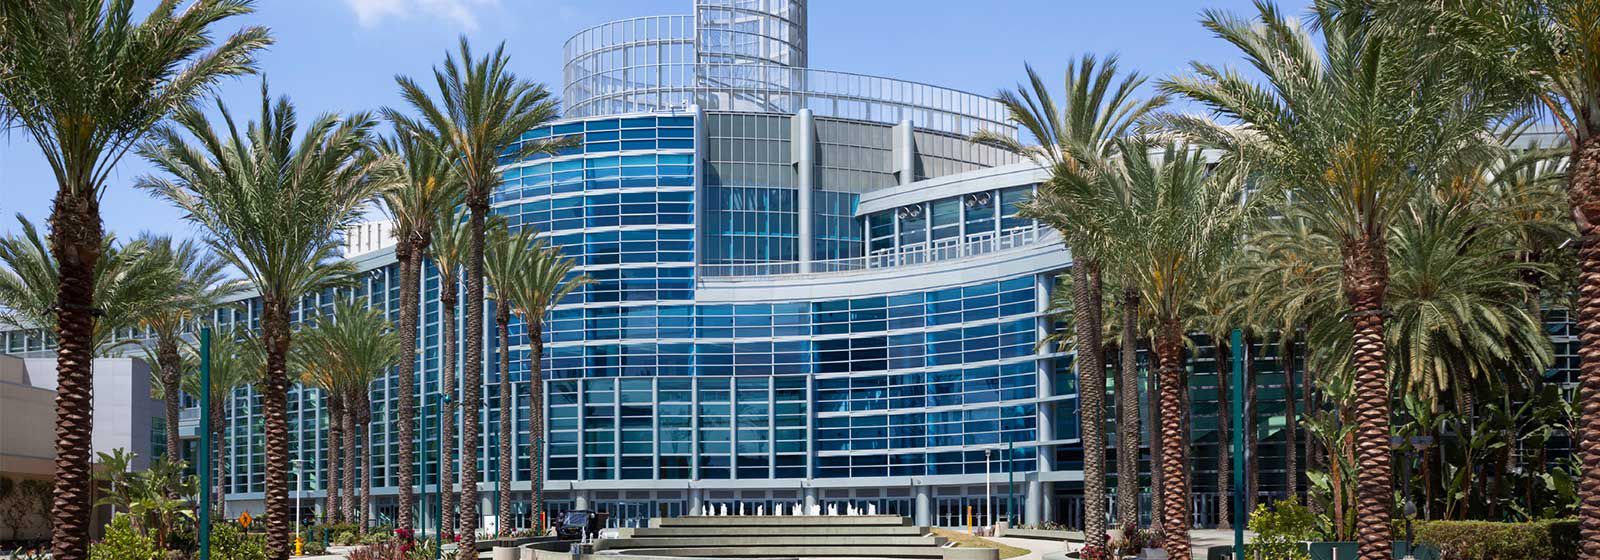 View of the Anaheim Convention Center